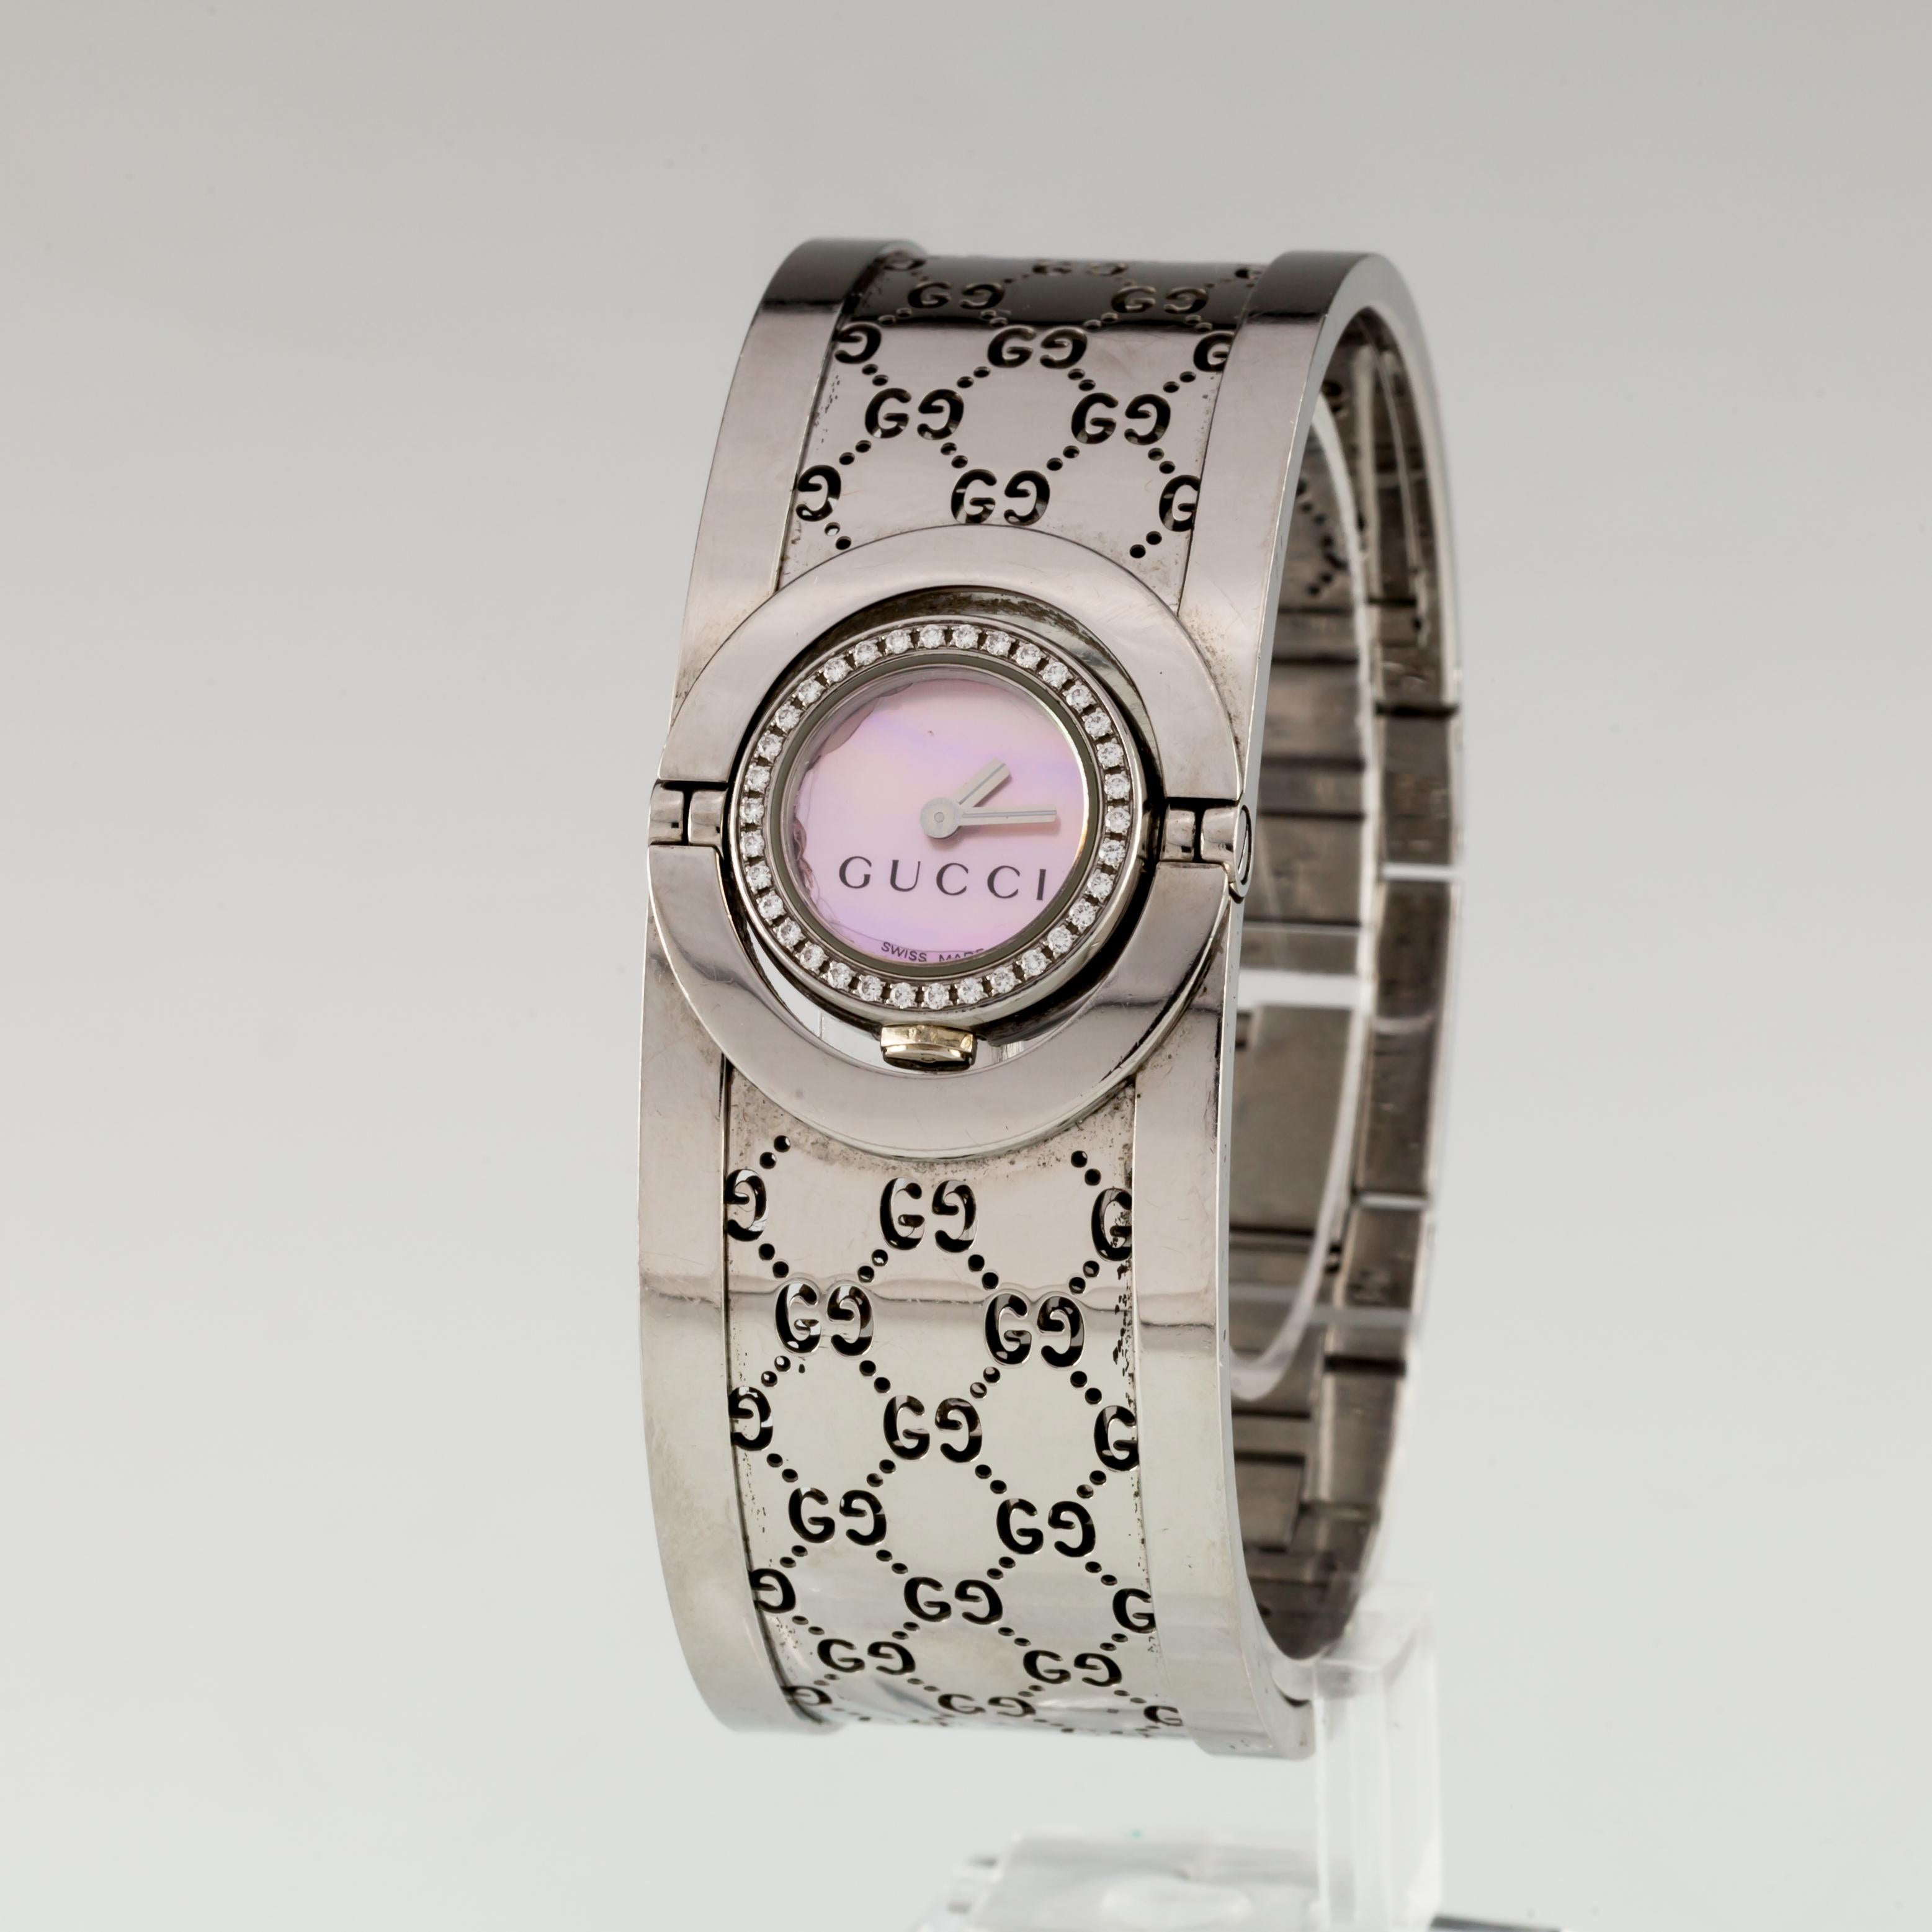 Gucci Stainless Steel Twirl Watch w/ Diamonds and MOP Dial w/ Box and Papers
Movement #1042
Case #3246

Stainless Steel Rotating Round Case w/ Diamond Bezel
16 mm in Diameter (17 mm w/ Crown)
Lug-to-Lug Width = 23 mm
Thickness = 6 mm

Pink